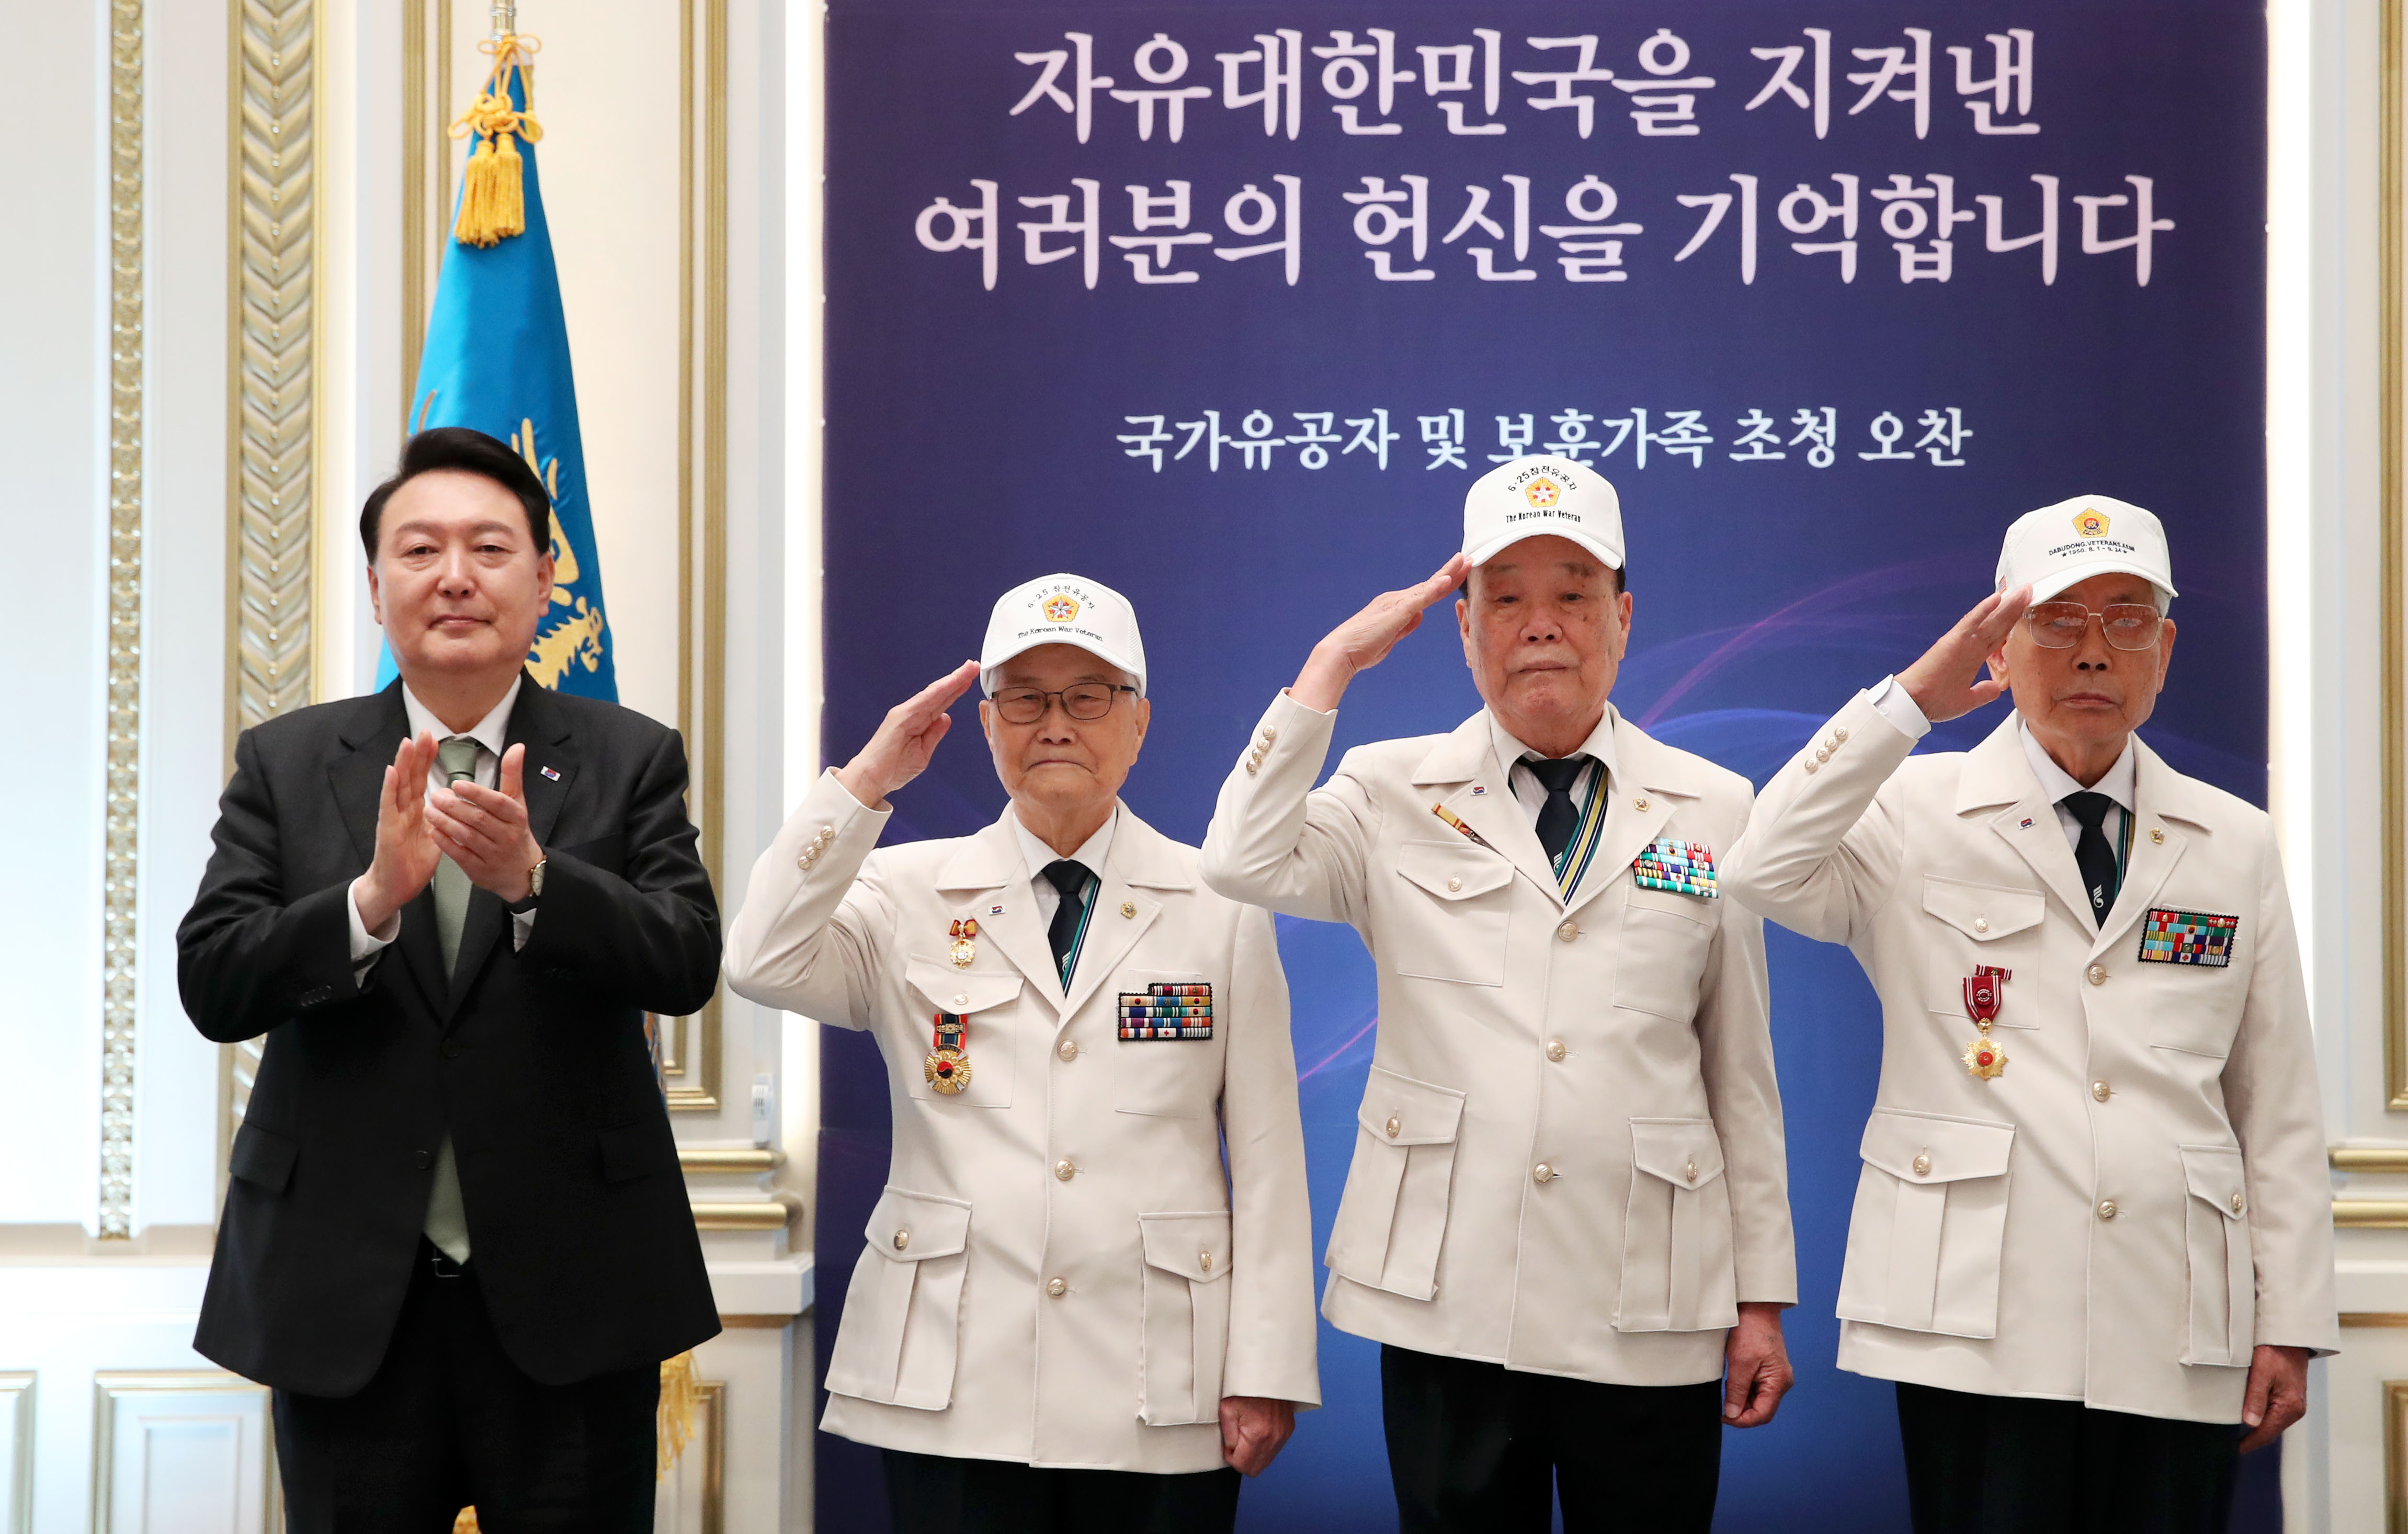  President Yoon on June 14, 2023, takes a photo with Son Hee-won (2nd from left), Kim Chang-seok and Lee Ha-young, directors of the Korean War Veterans Association whom he dressed in 